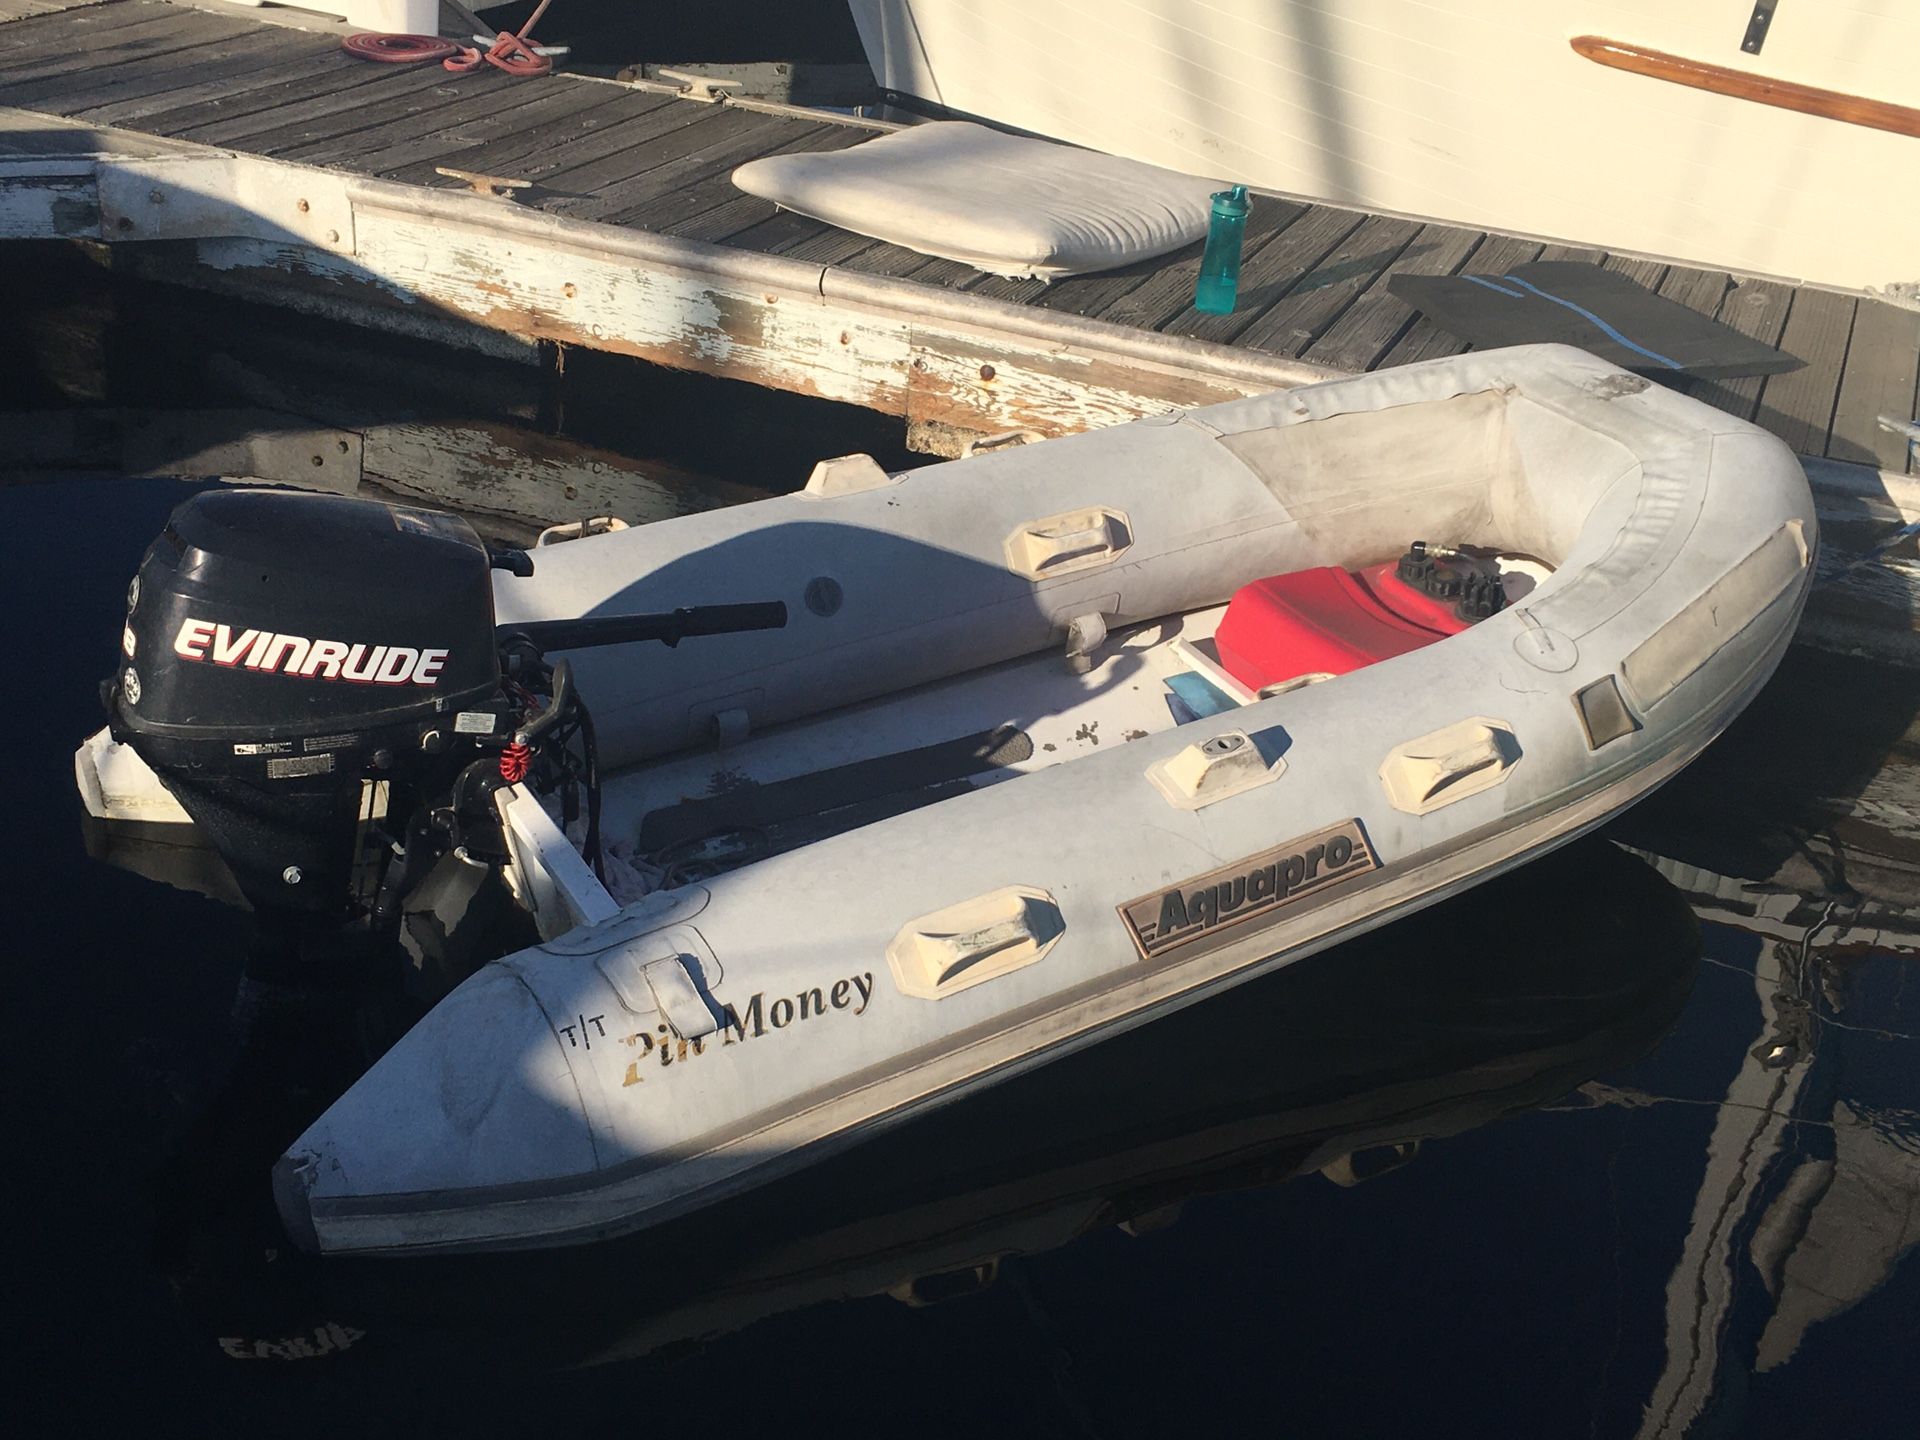 Solid 2003 9 feet rib inflatable with 2003 Evinrude motor 4 stroke